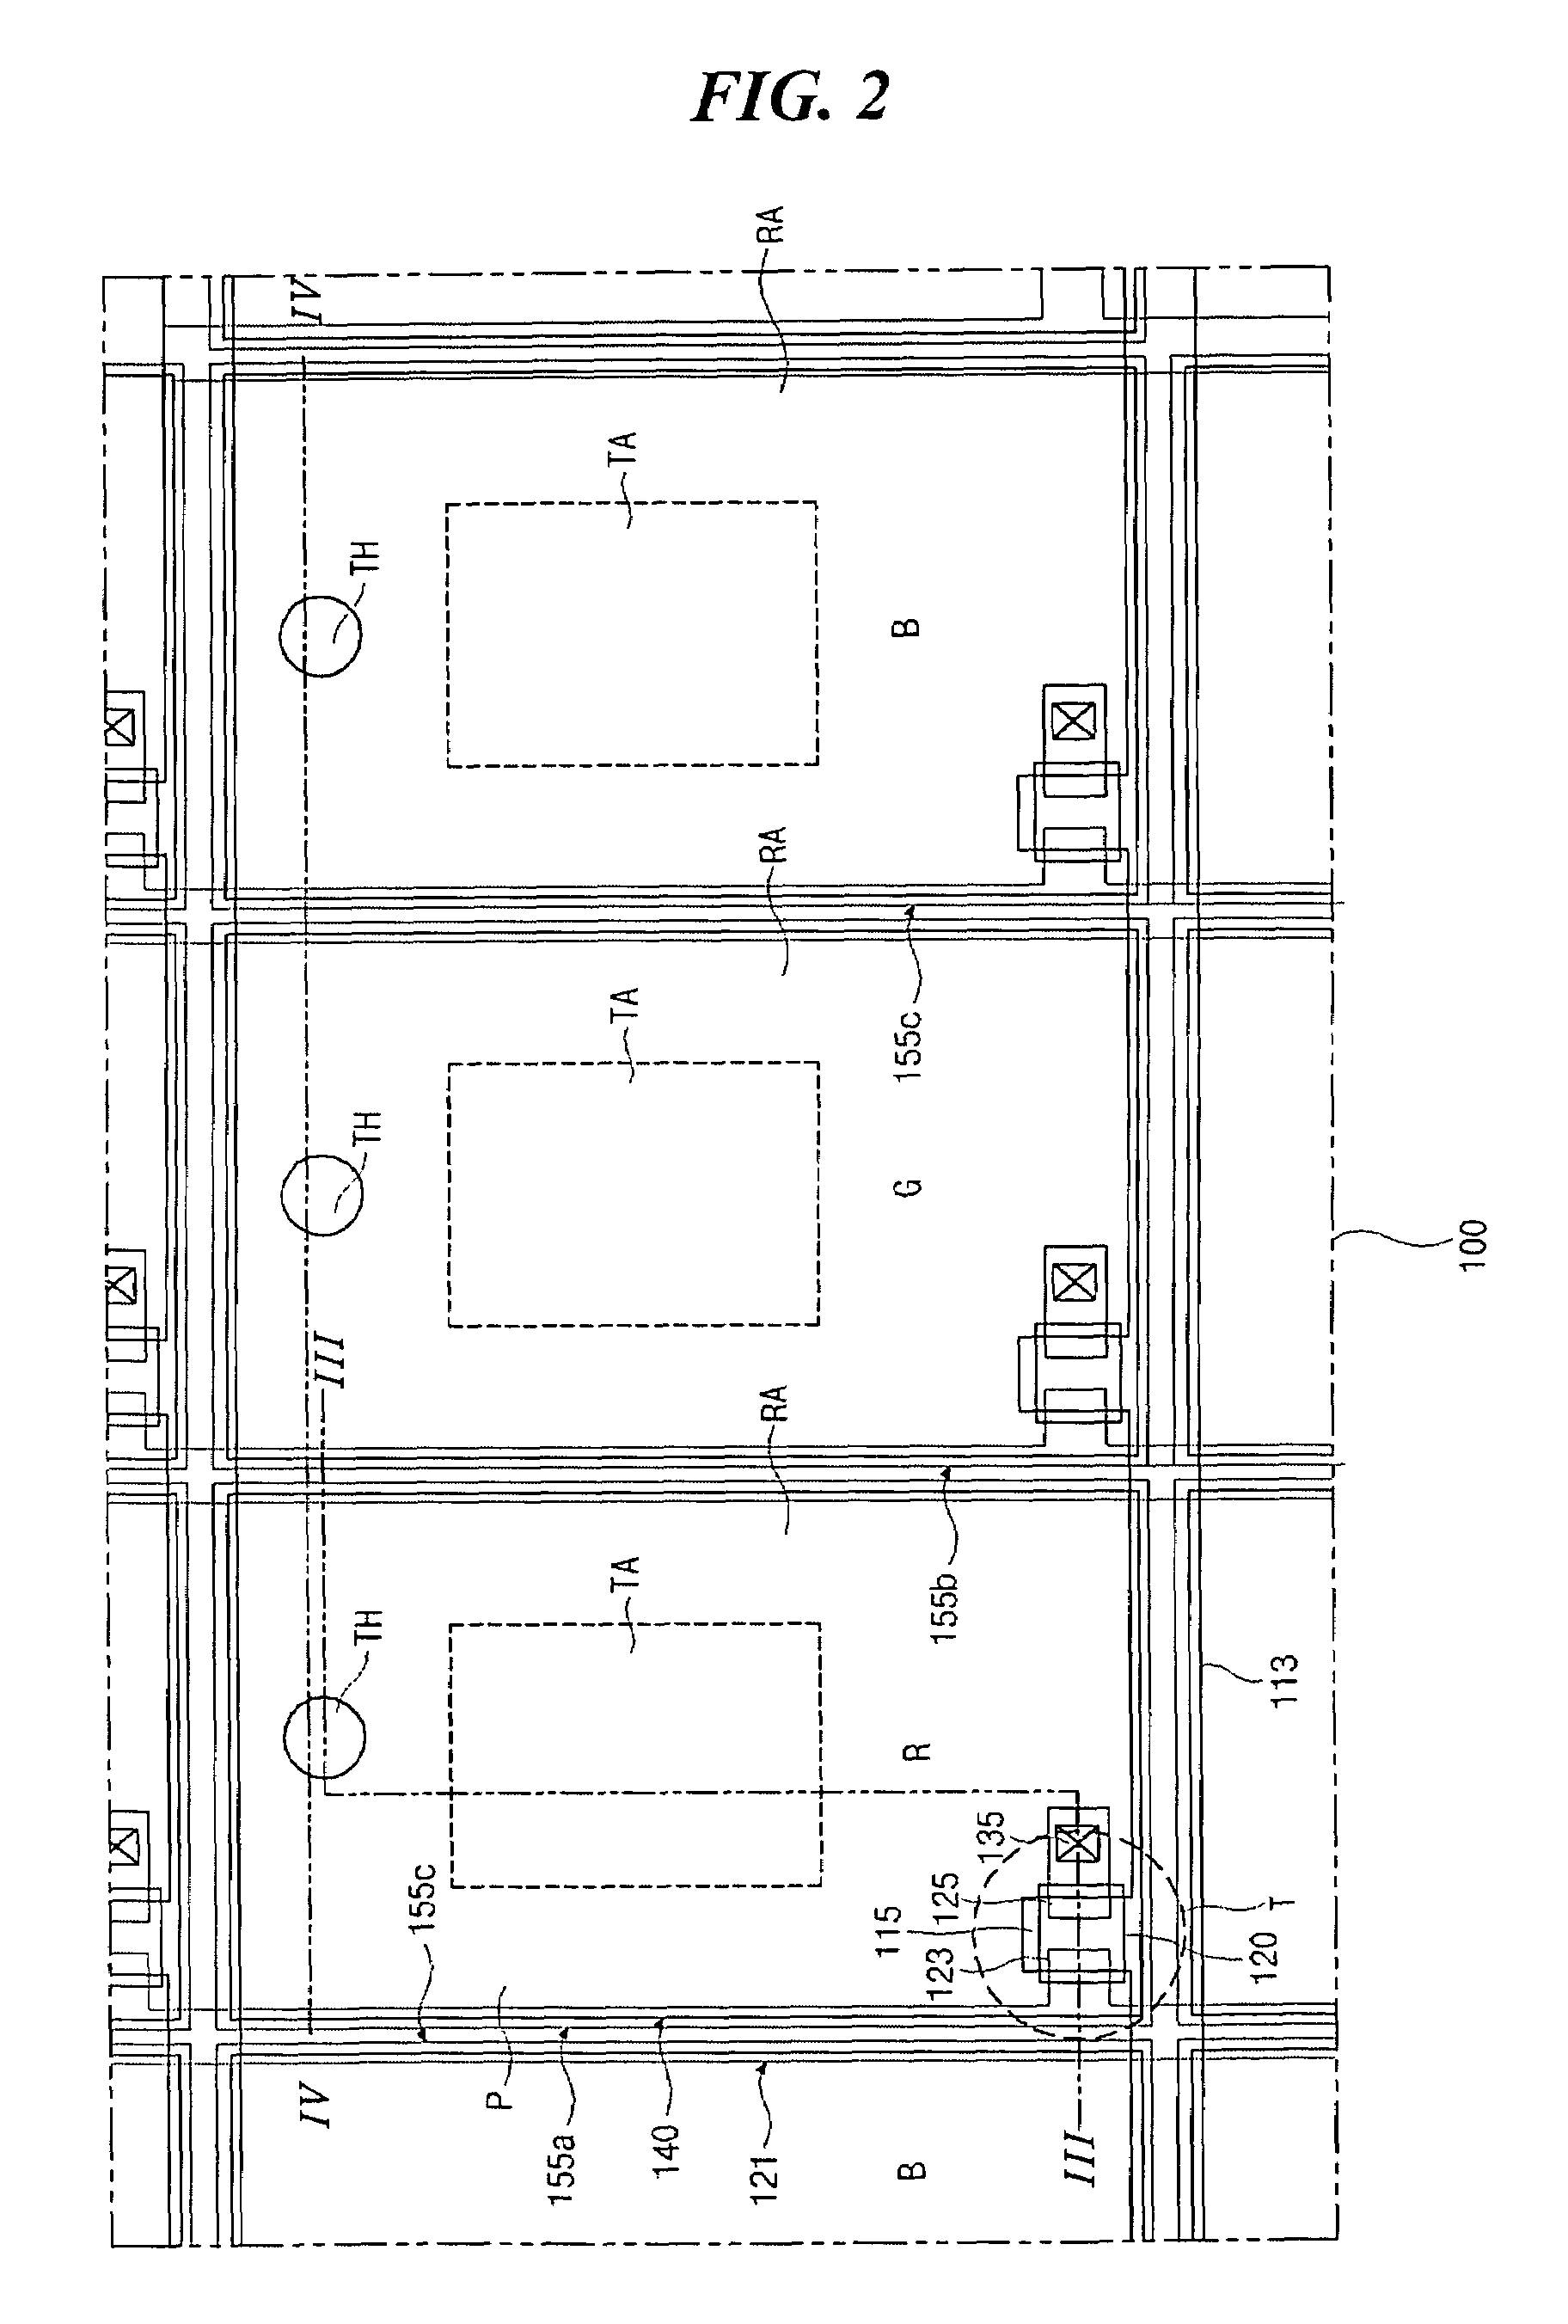 Transflective LCD device having color filters with through holes